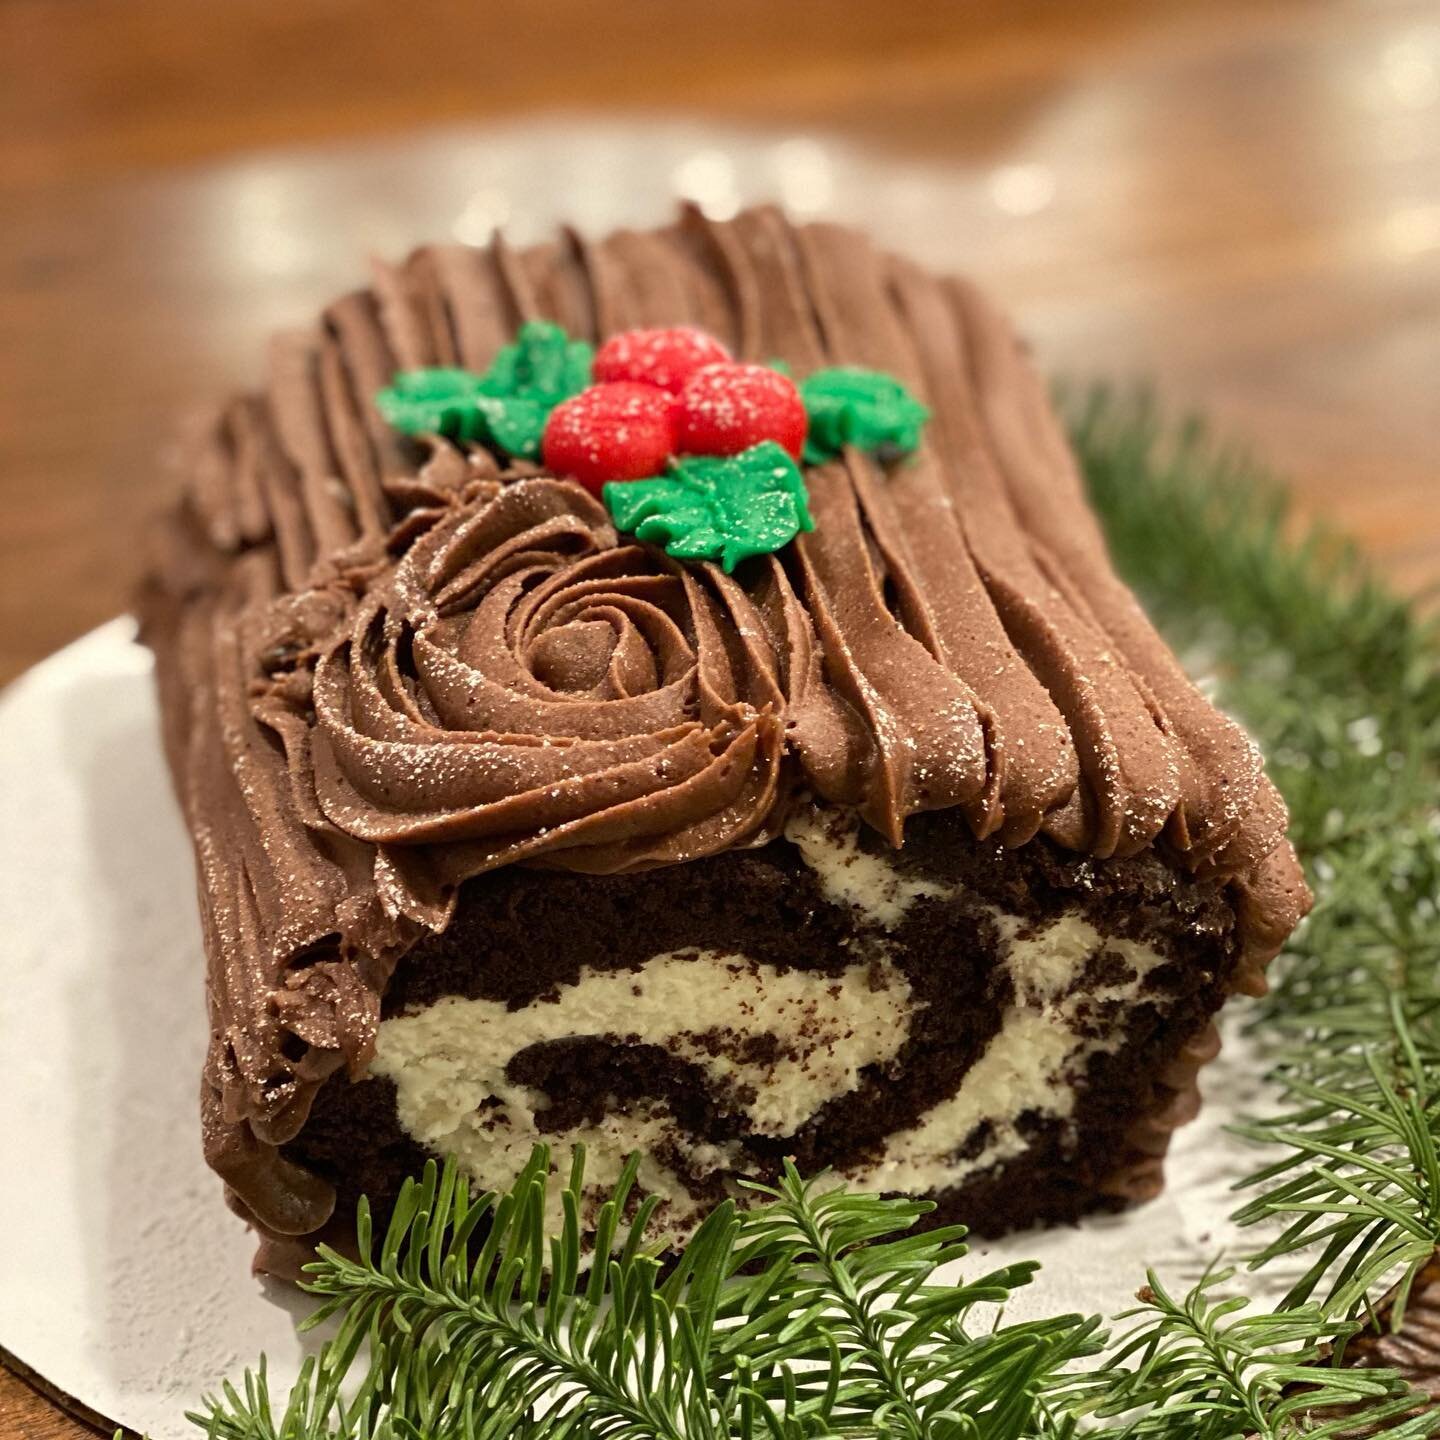 Merry Christmas!!! Time to preorder your Yule Logs &amp; Cinnamon Rolls!! Both of these items are Christmas exclusives! Yule Logs are sized to feed 6-8 for $25, my yummy chocolatey cake rolled with a cream fluffy vanilla filling &amp; topped with a r